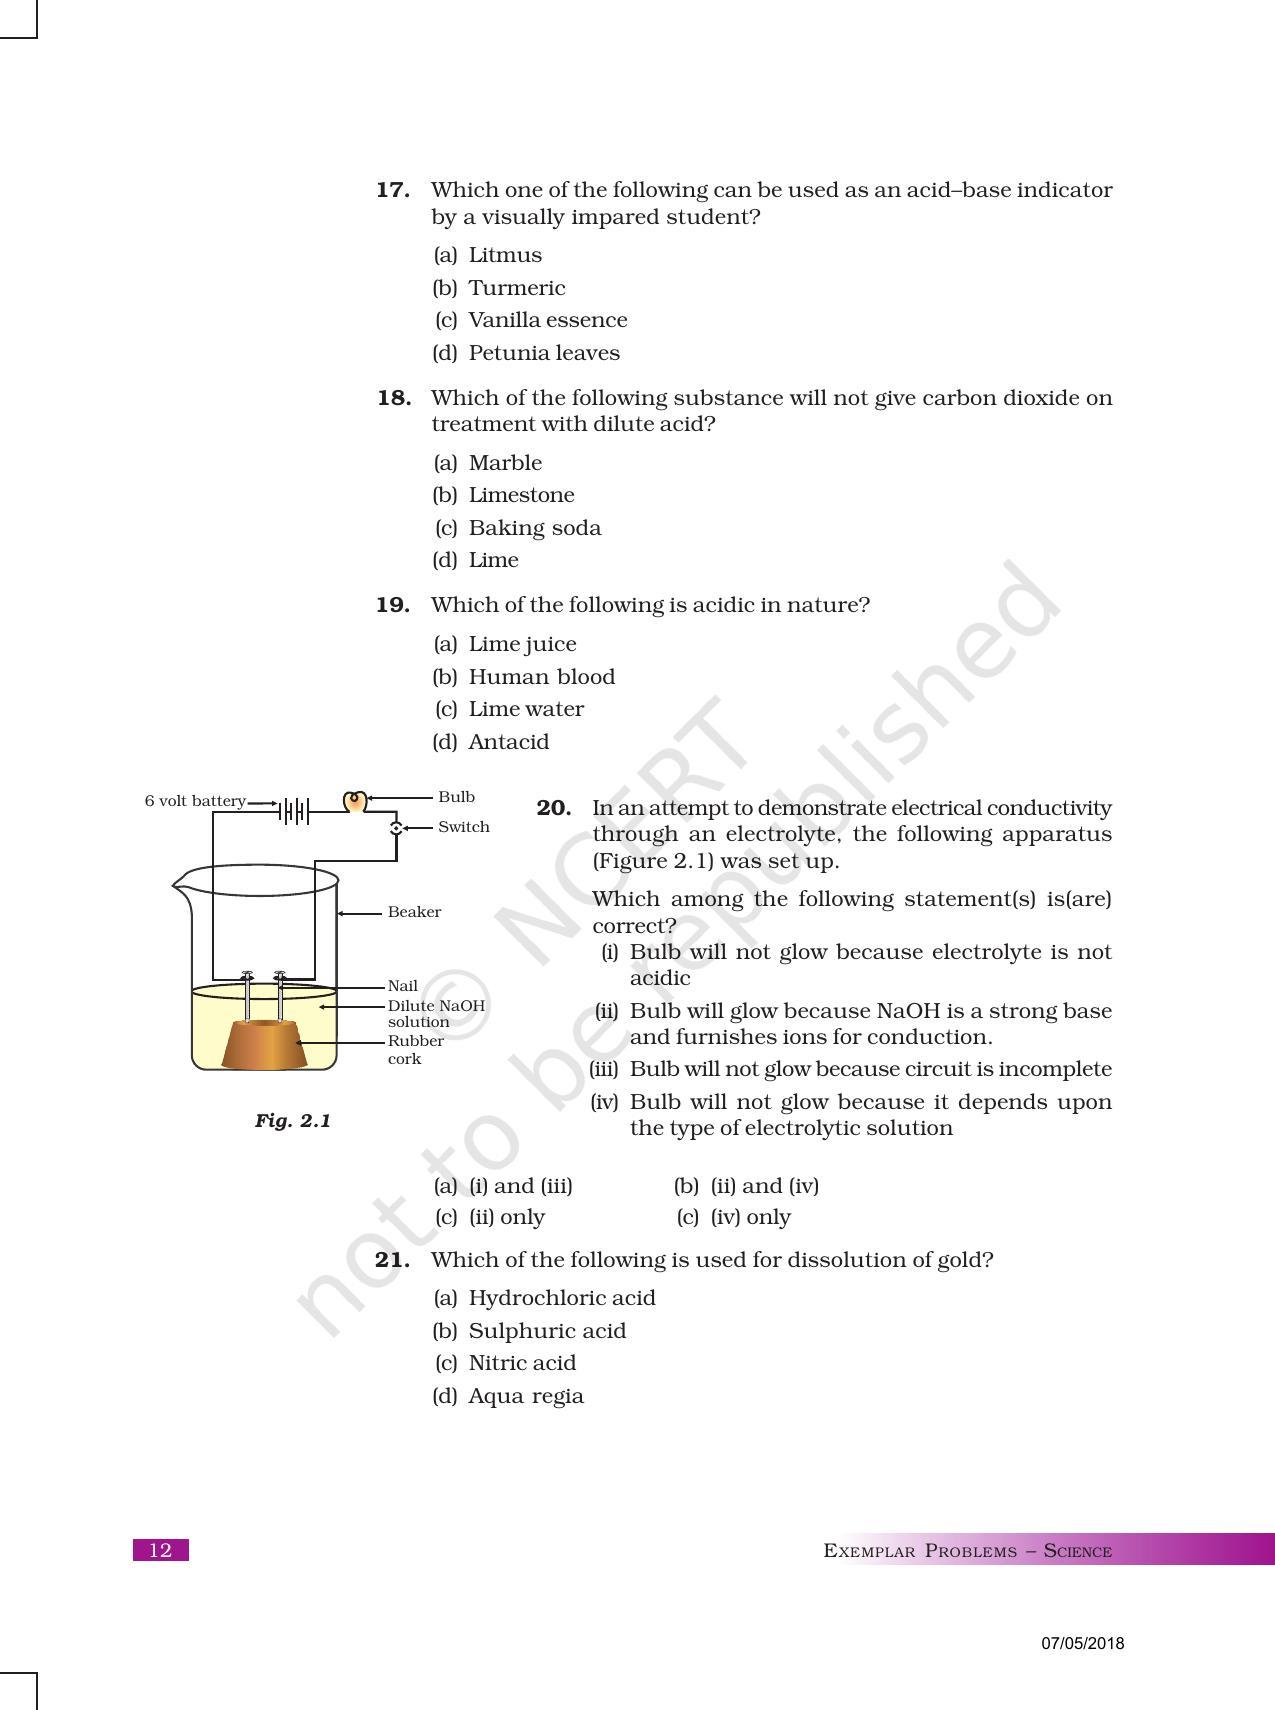 NCERT Exemplar Book for Class 10 Science: Chapter 2 Acids, Bases, and Salts - Page 4